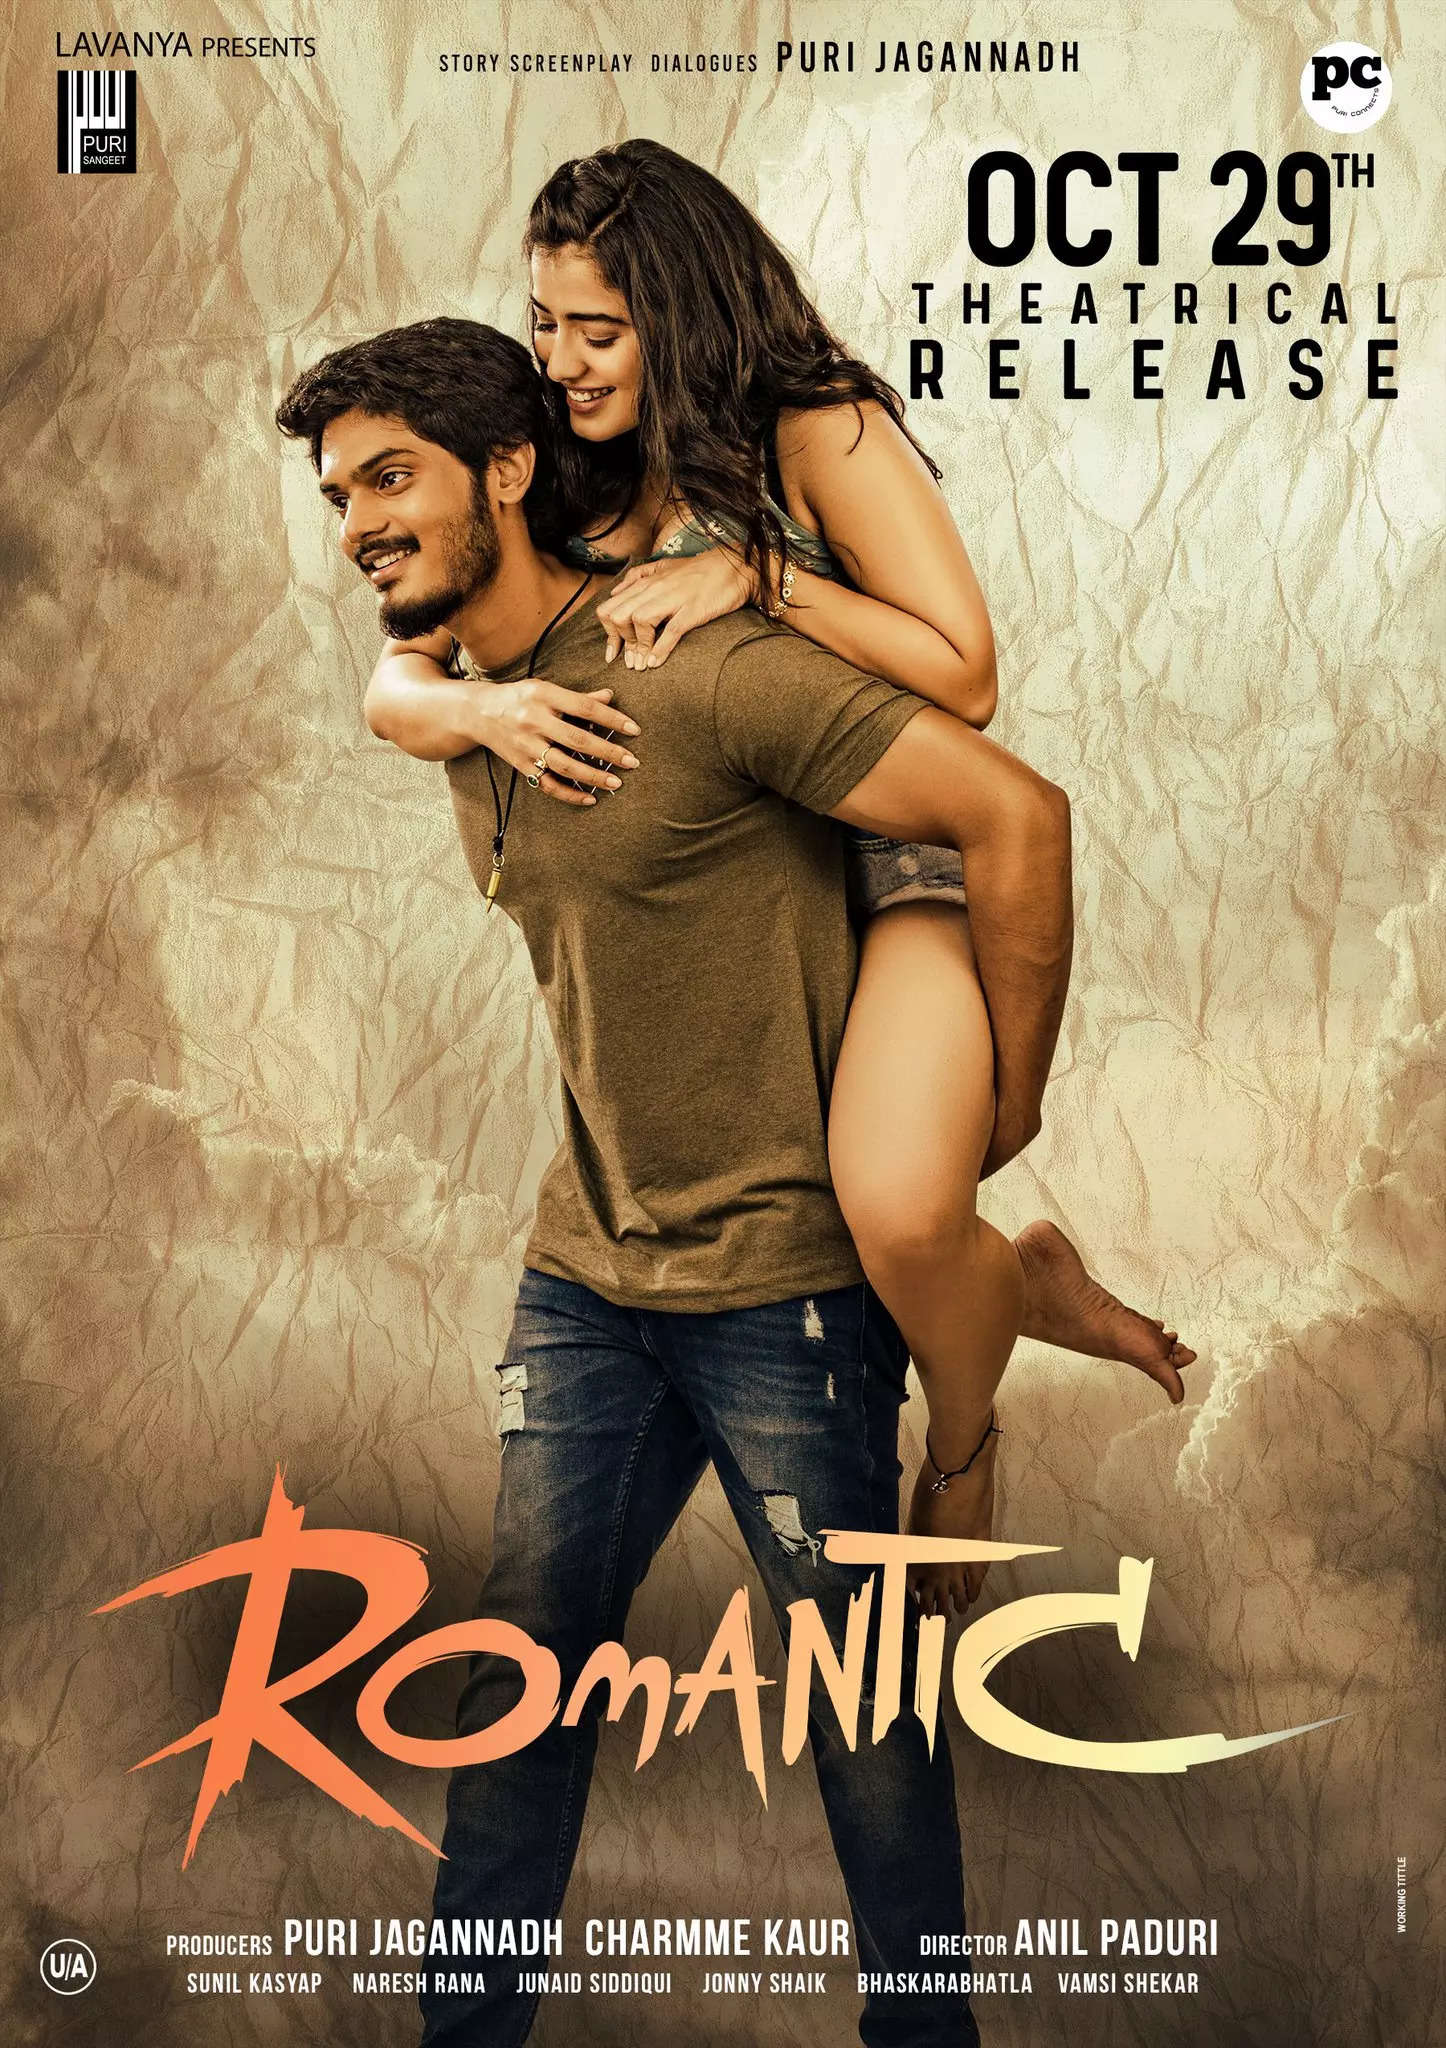 Romantic Movie Review Puris gangster version of Romeo and Juliet